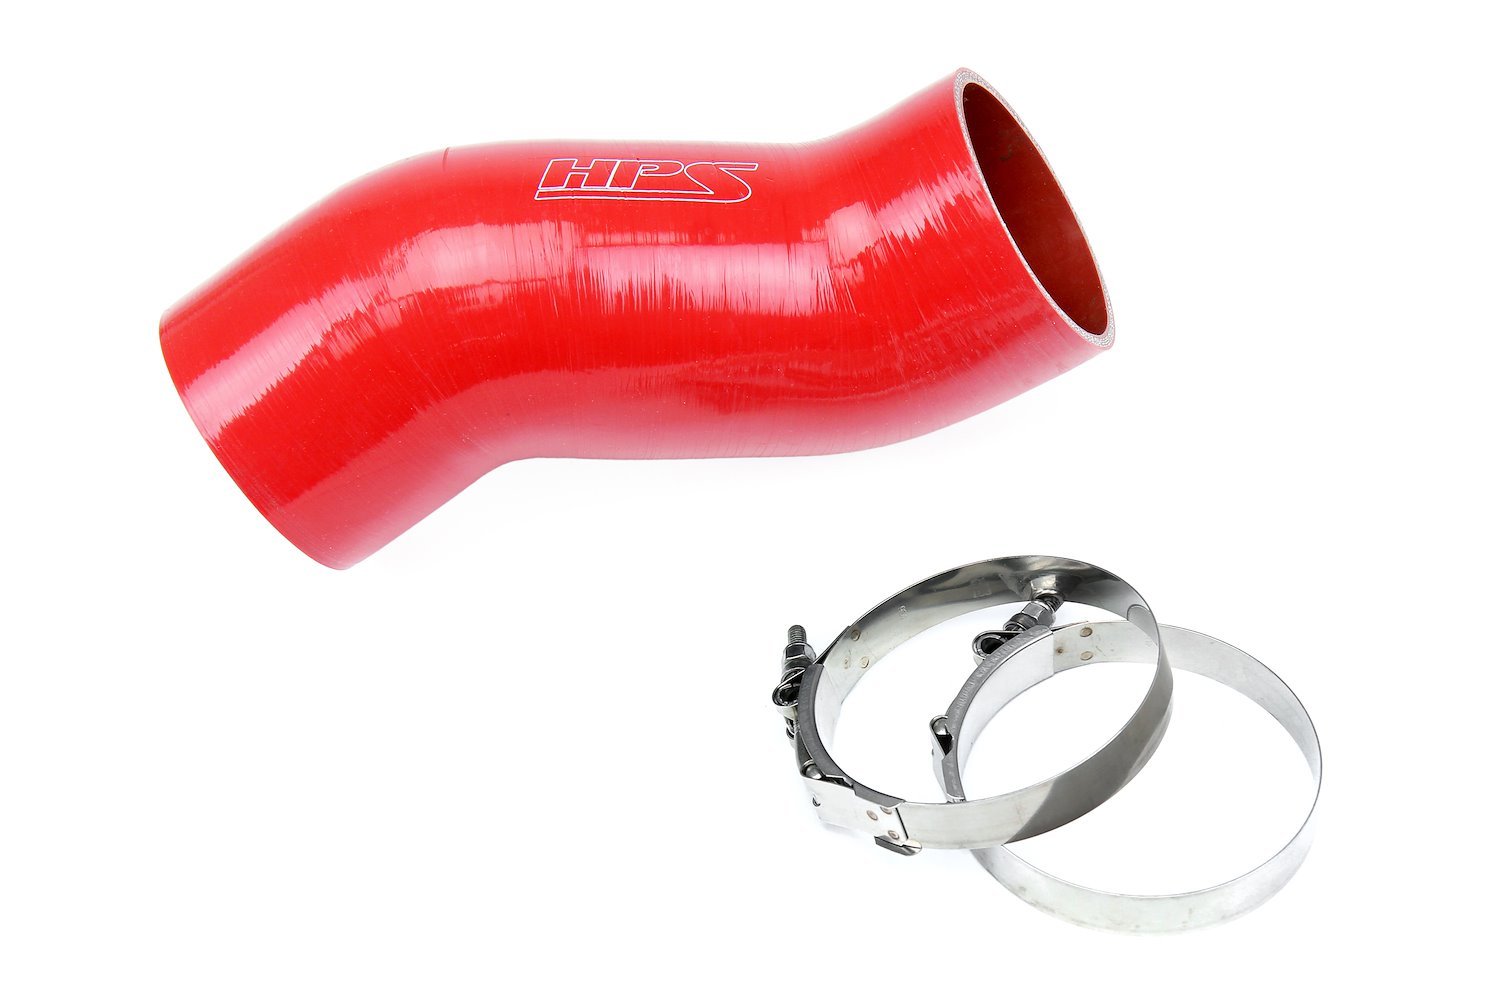 57-1862-RED Silicone Air Intake Kit, Replace Damaged Or Restrictive Stock Air Intake, Improve Throttle Response